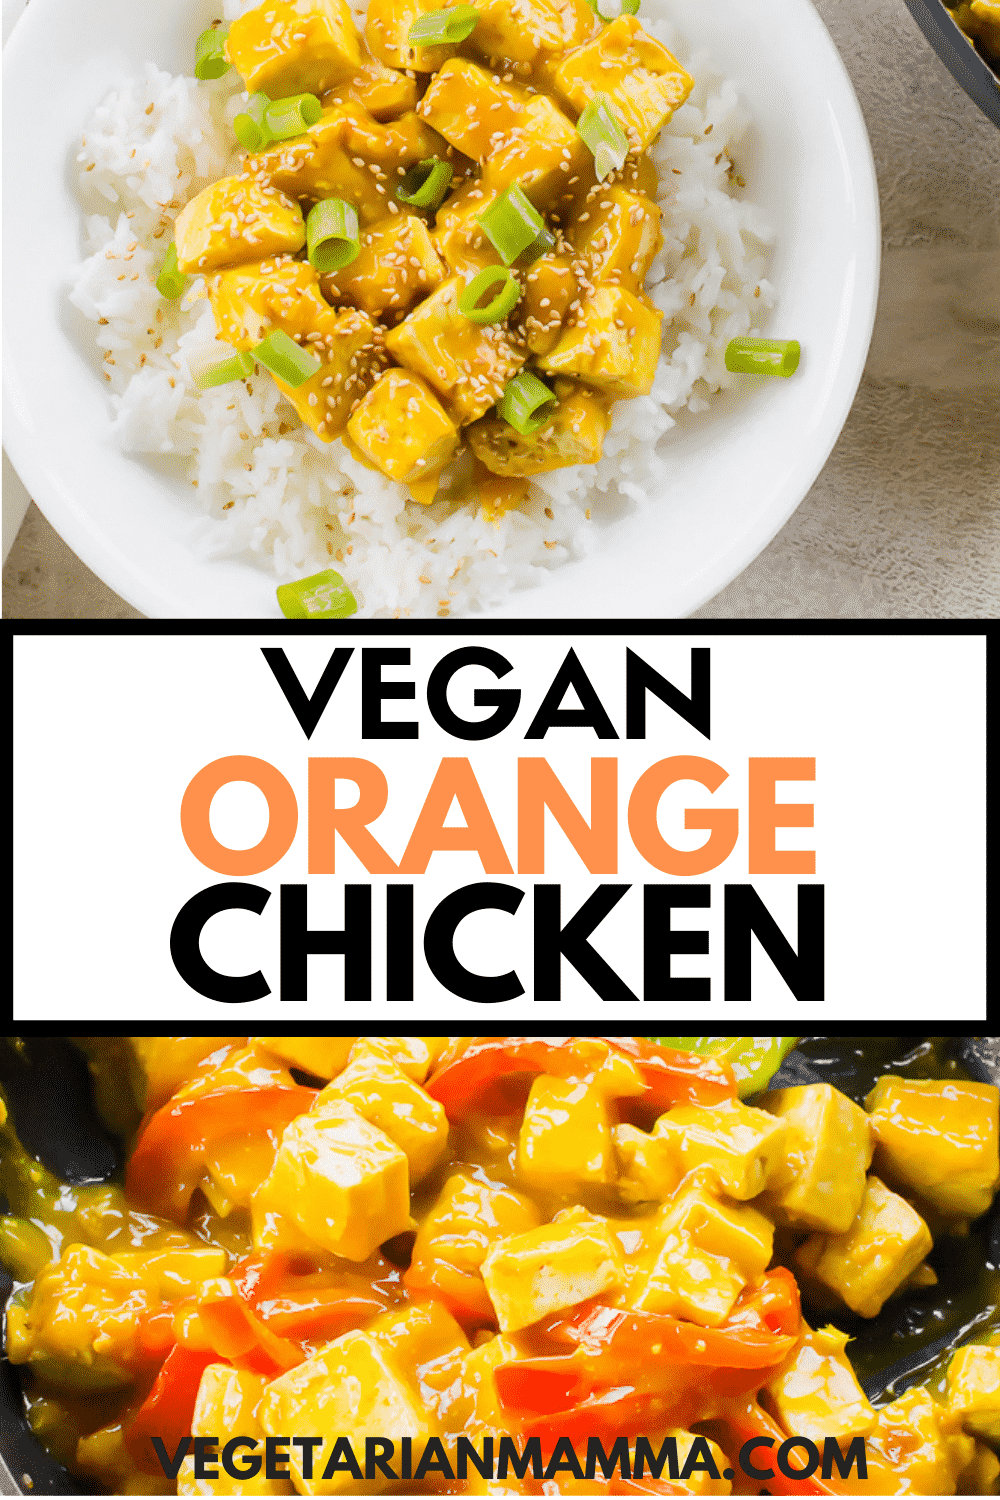 Vegan Orange Chicken is a delicious take on Panda Express Orange Chicken. It is an easy tofu recipe that your entire family will love! #pandaexpress #orangechicken #tofu #veganorangechicken #orangetofu